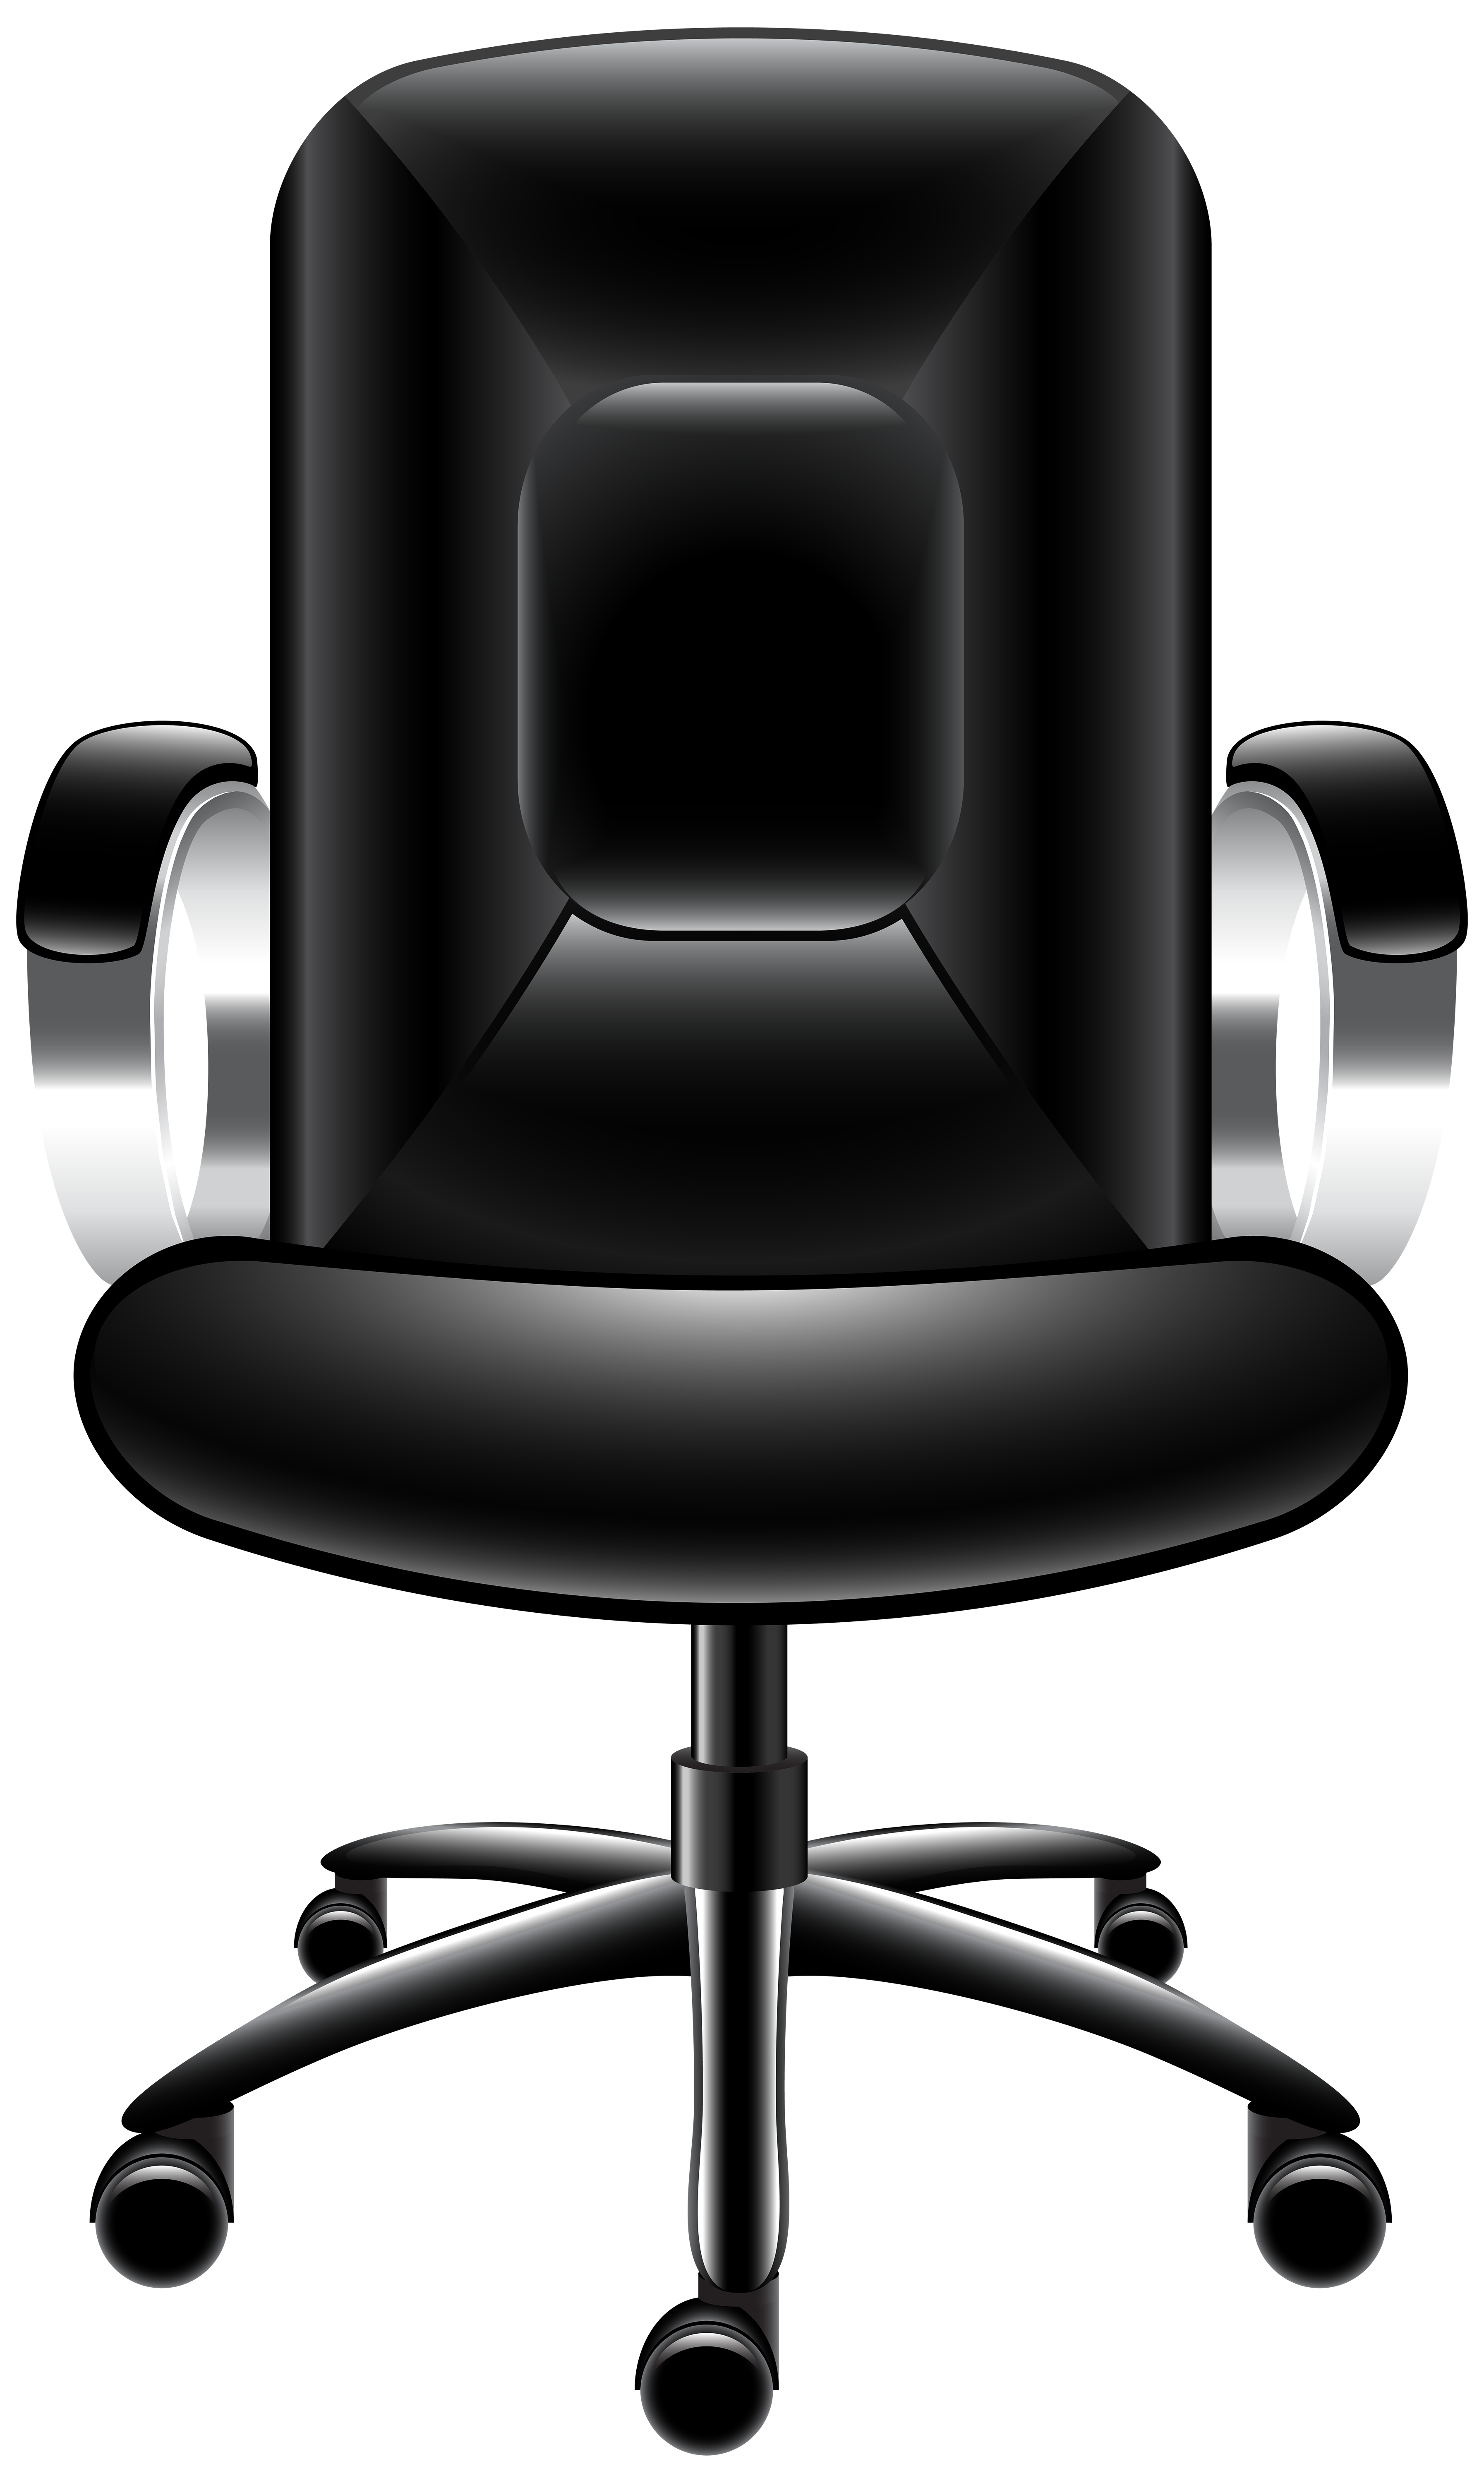 Clipart Office Chair and other clipart images on Cliparts pub ™.